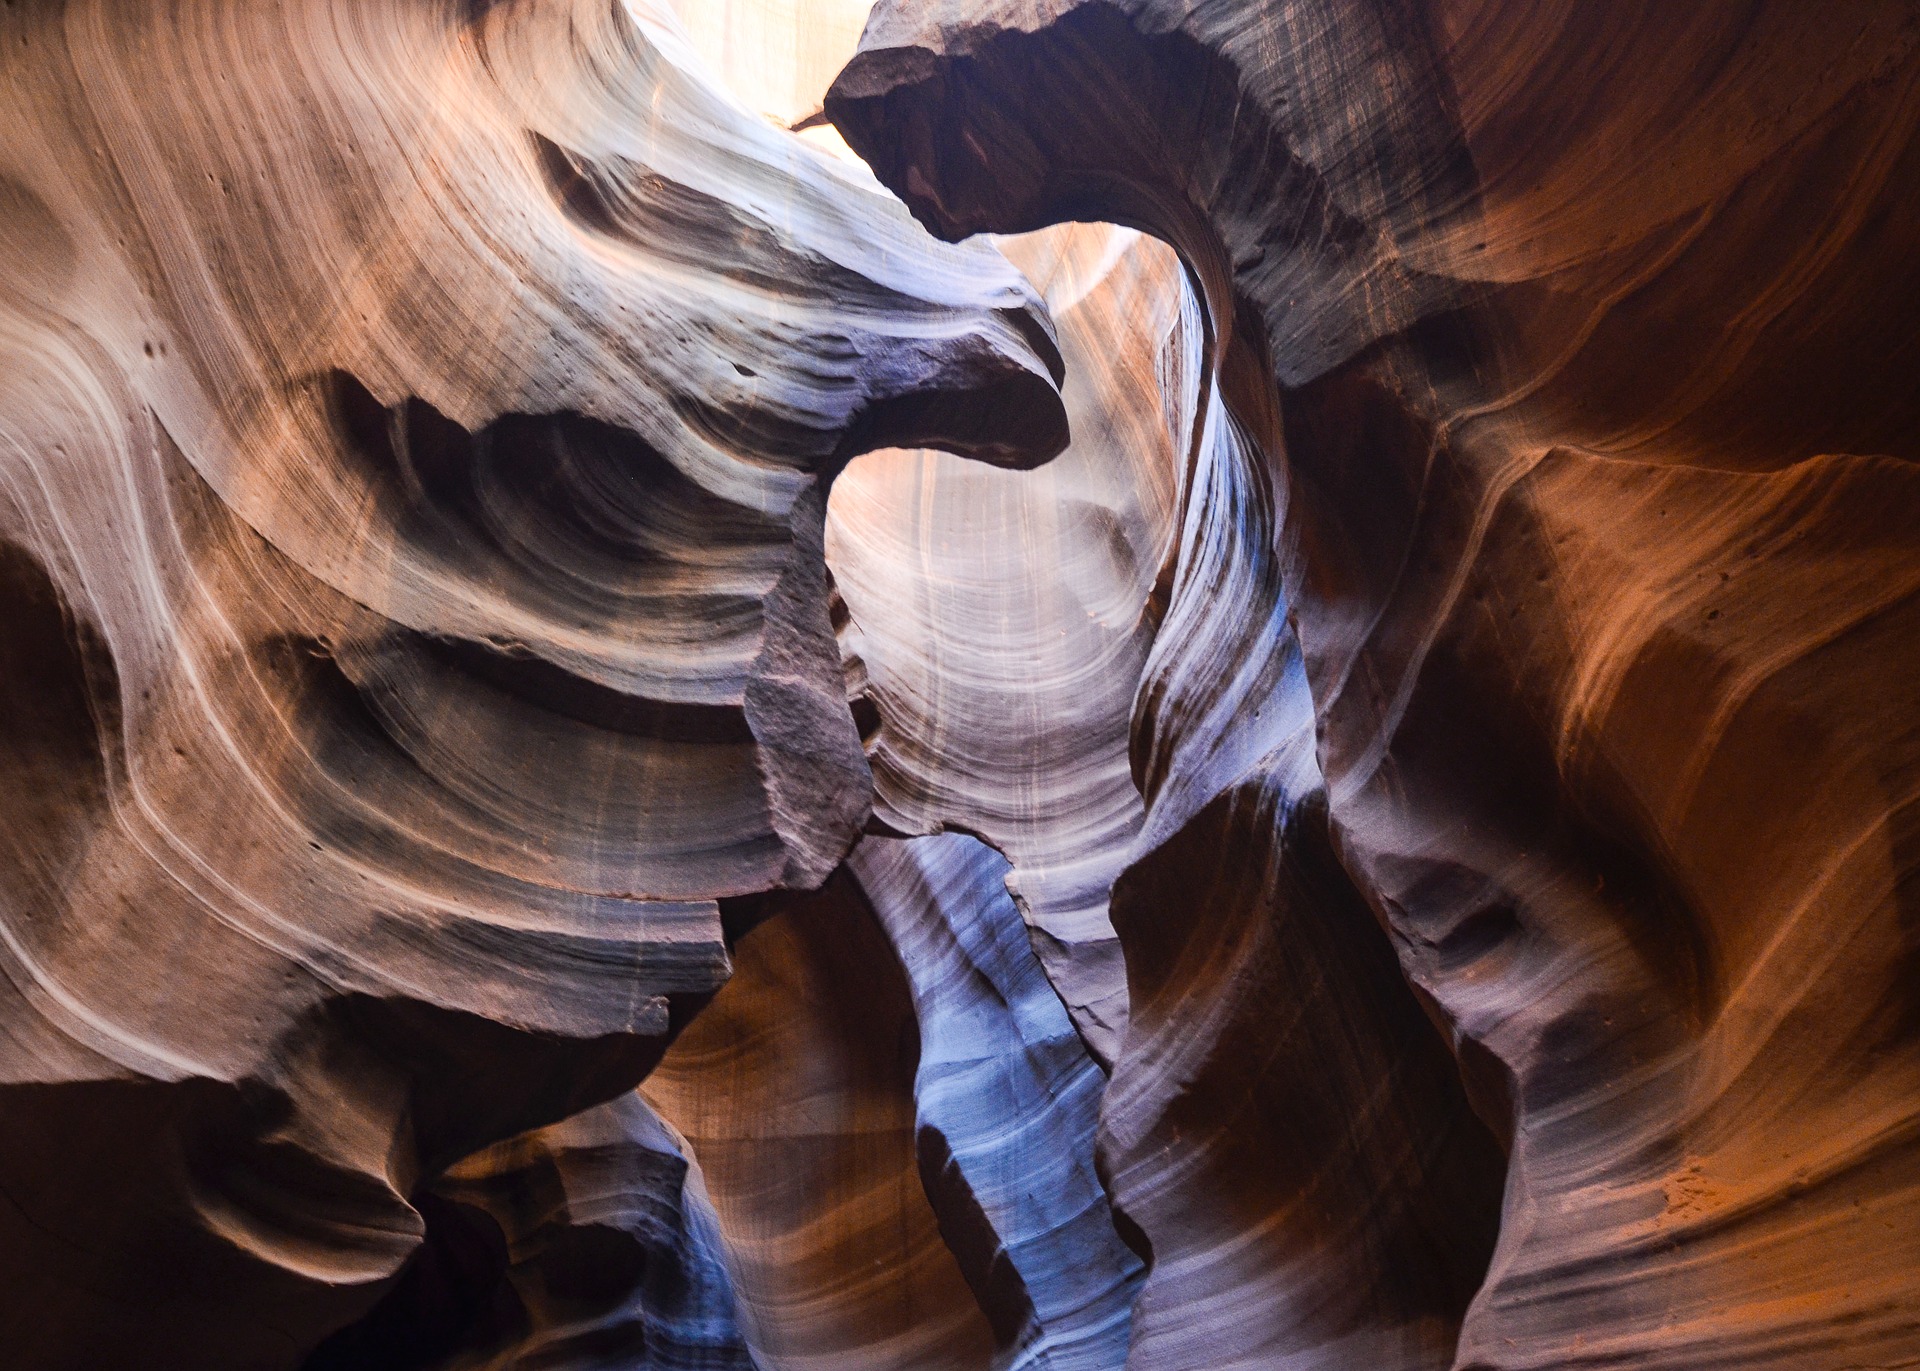 antelope canyon worth the trip